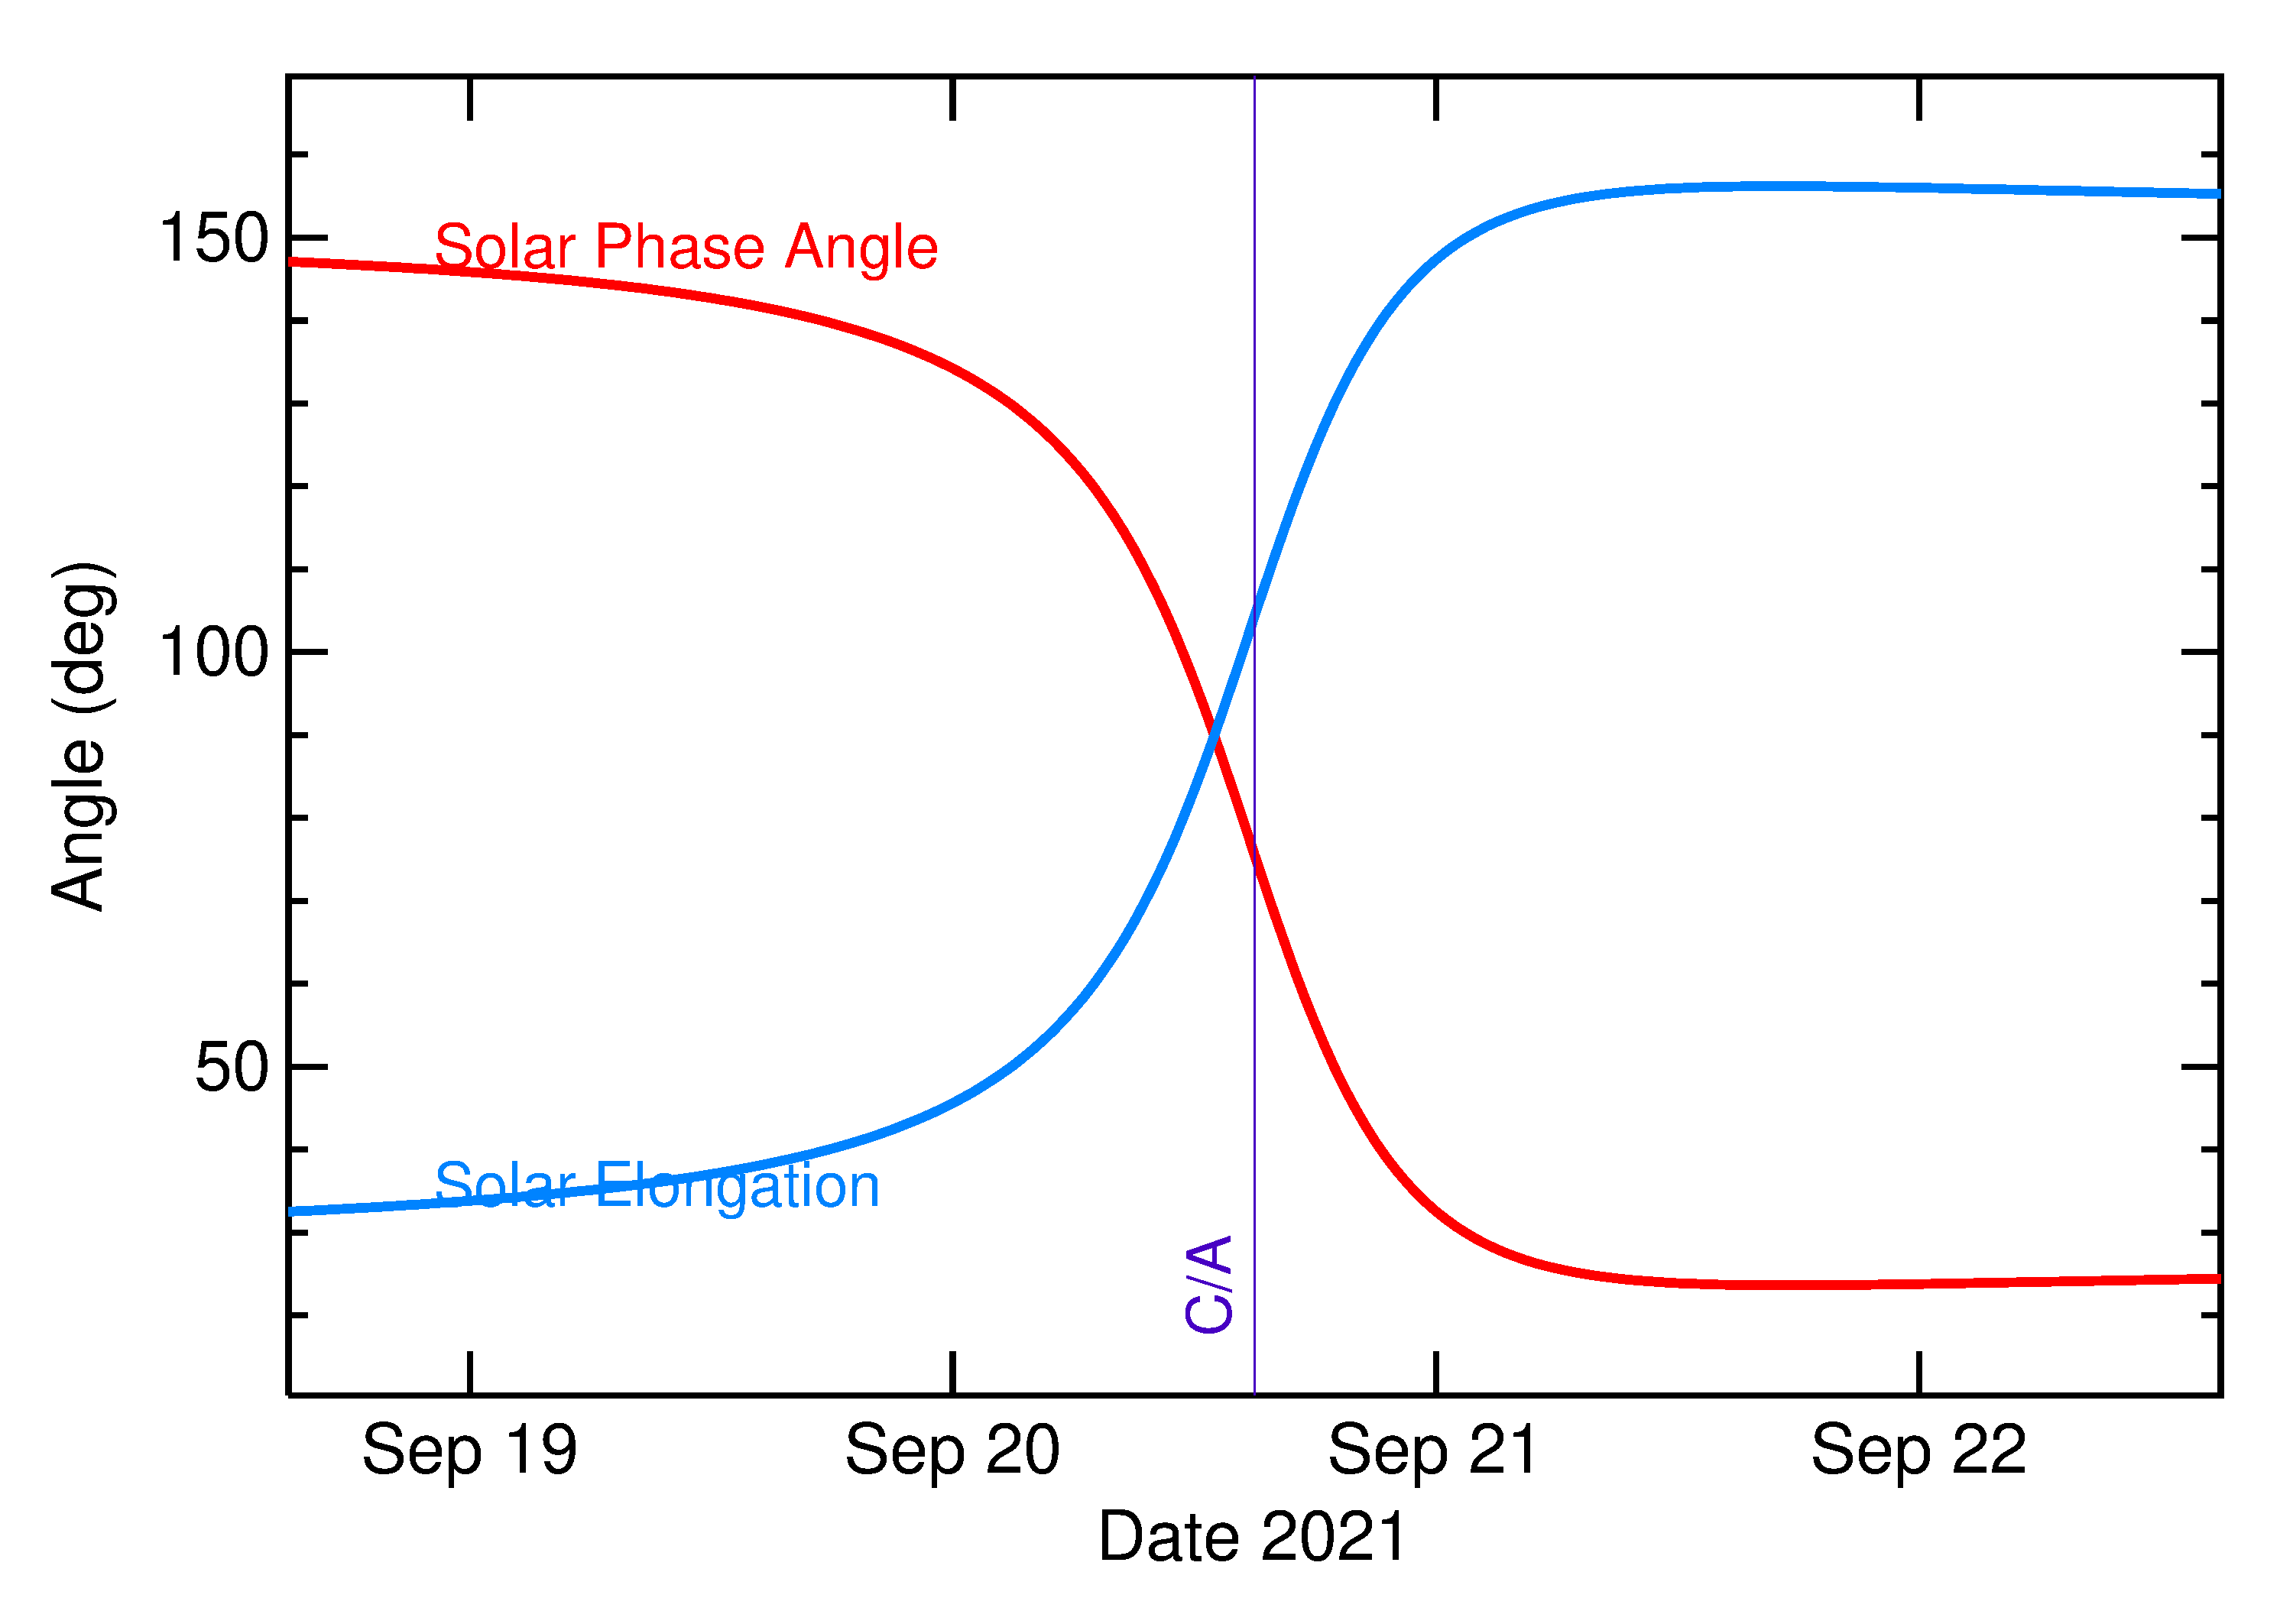 Solar Elongation and Solar Phase Angle of 2021 SQ in the days around closest approach